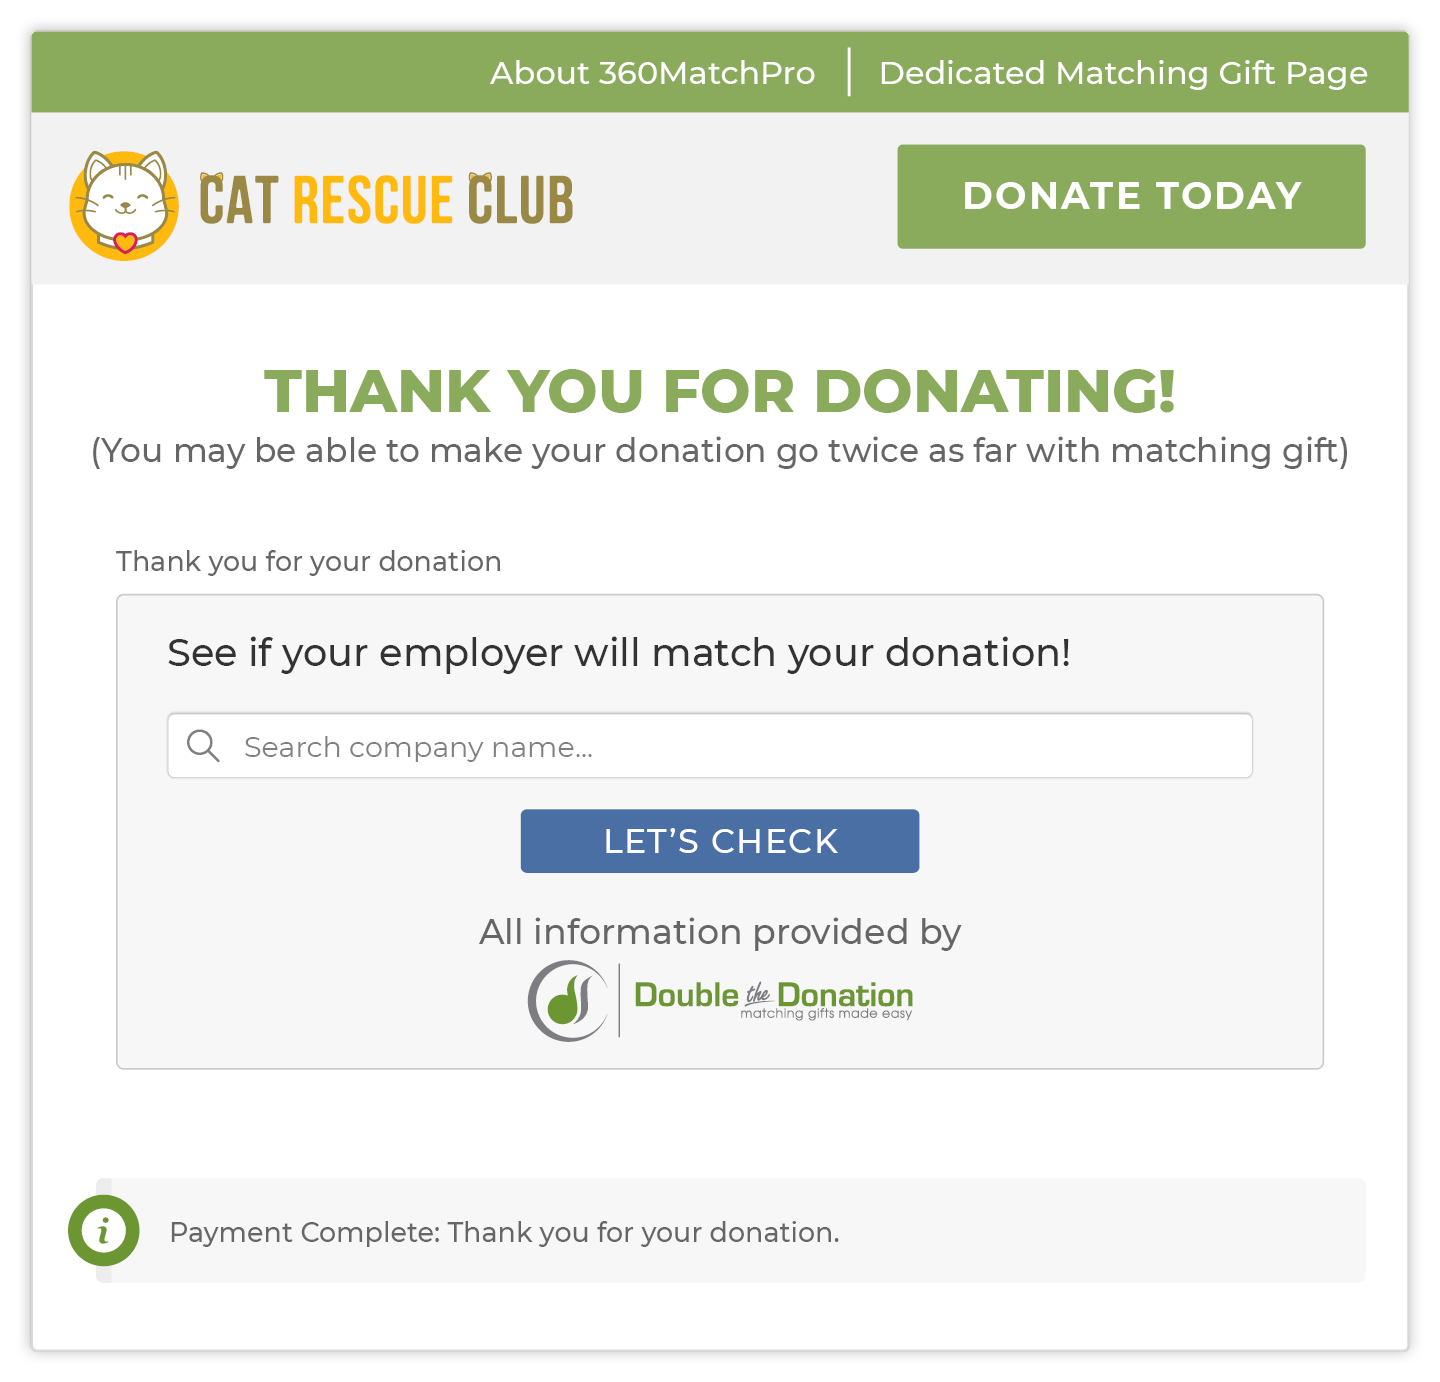 Here's an example of how to use resources to improve the donor journey with matching gifts.